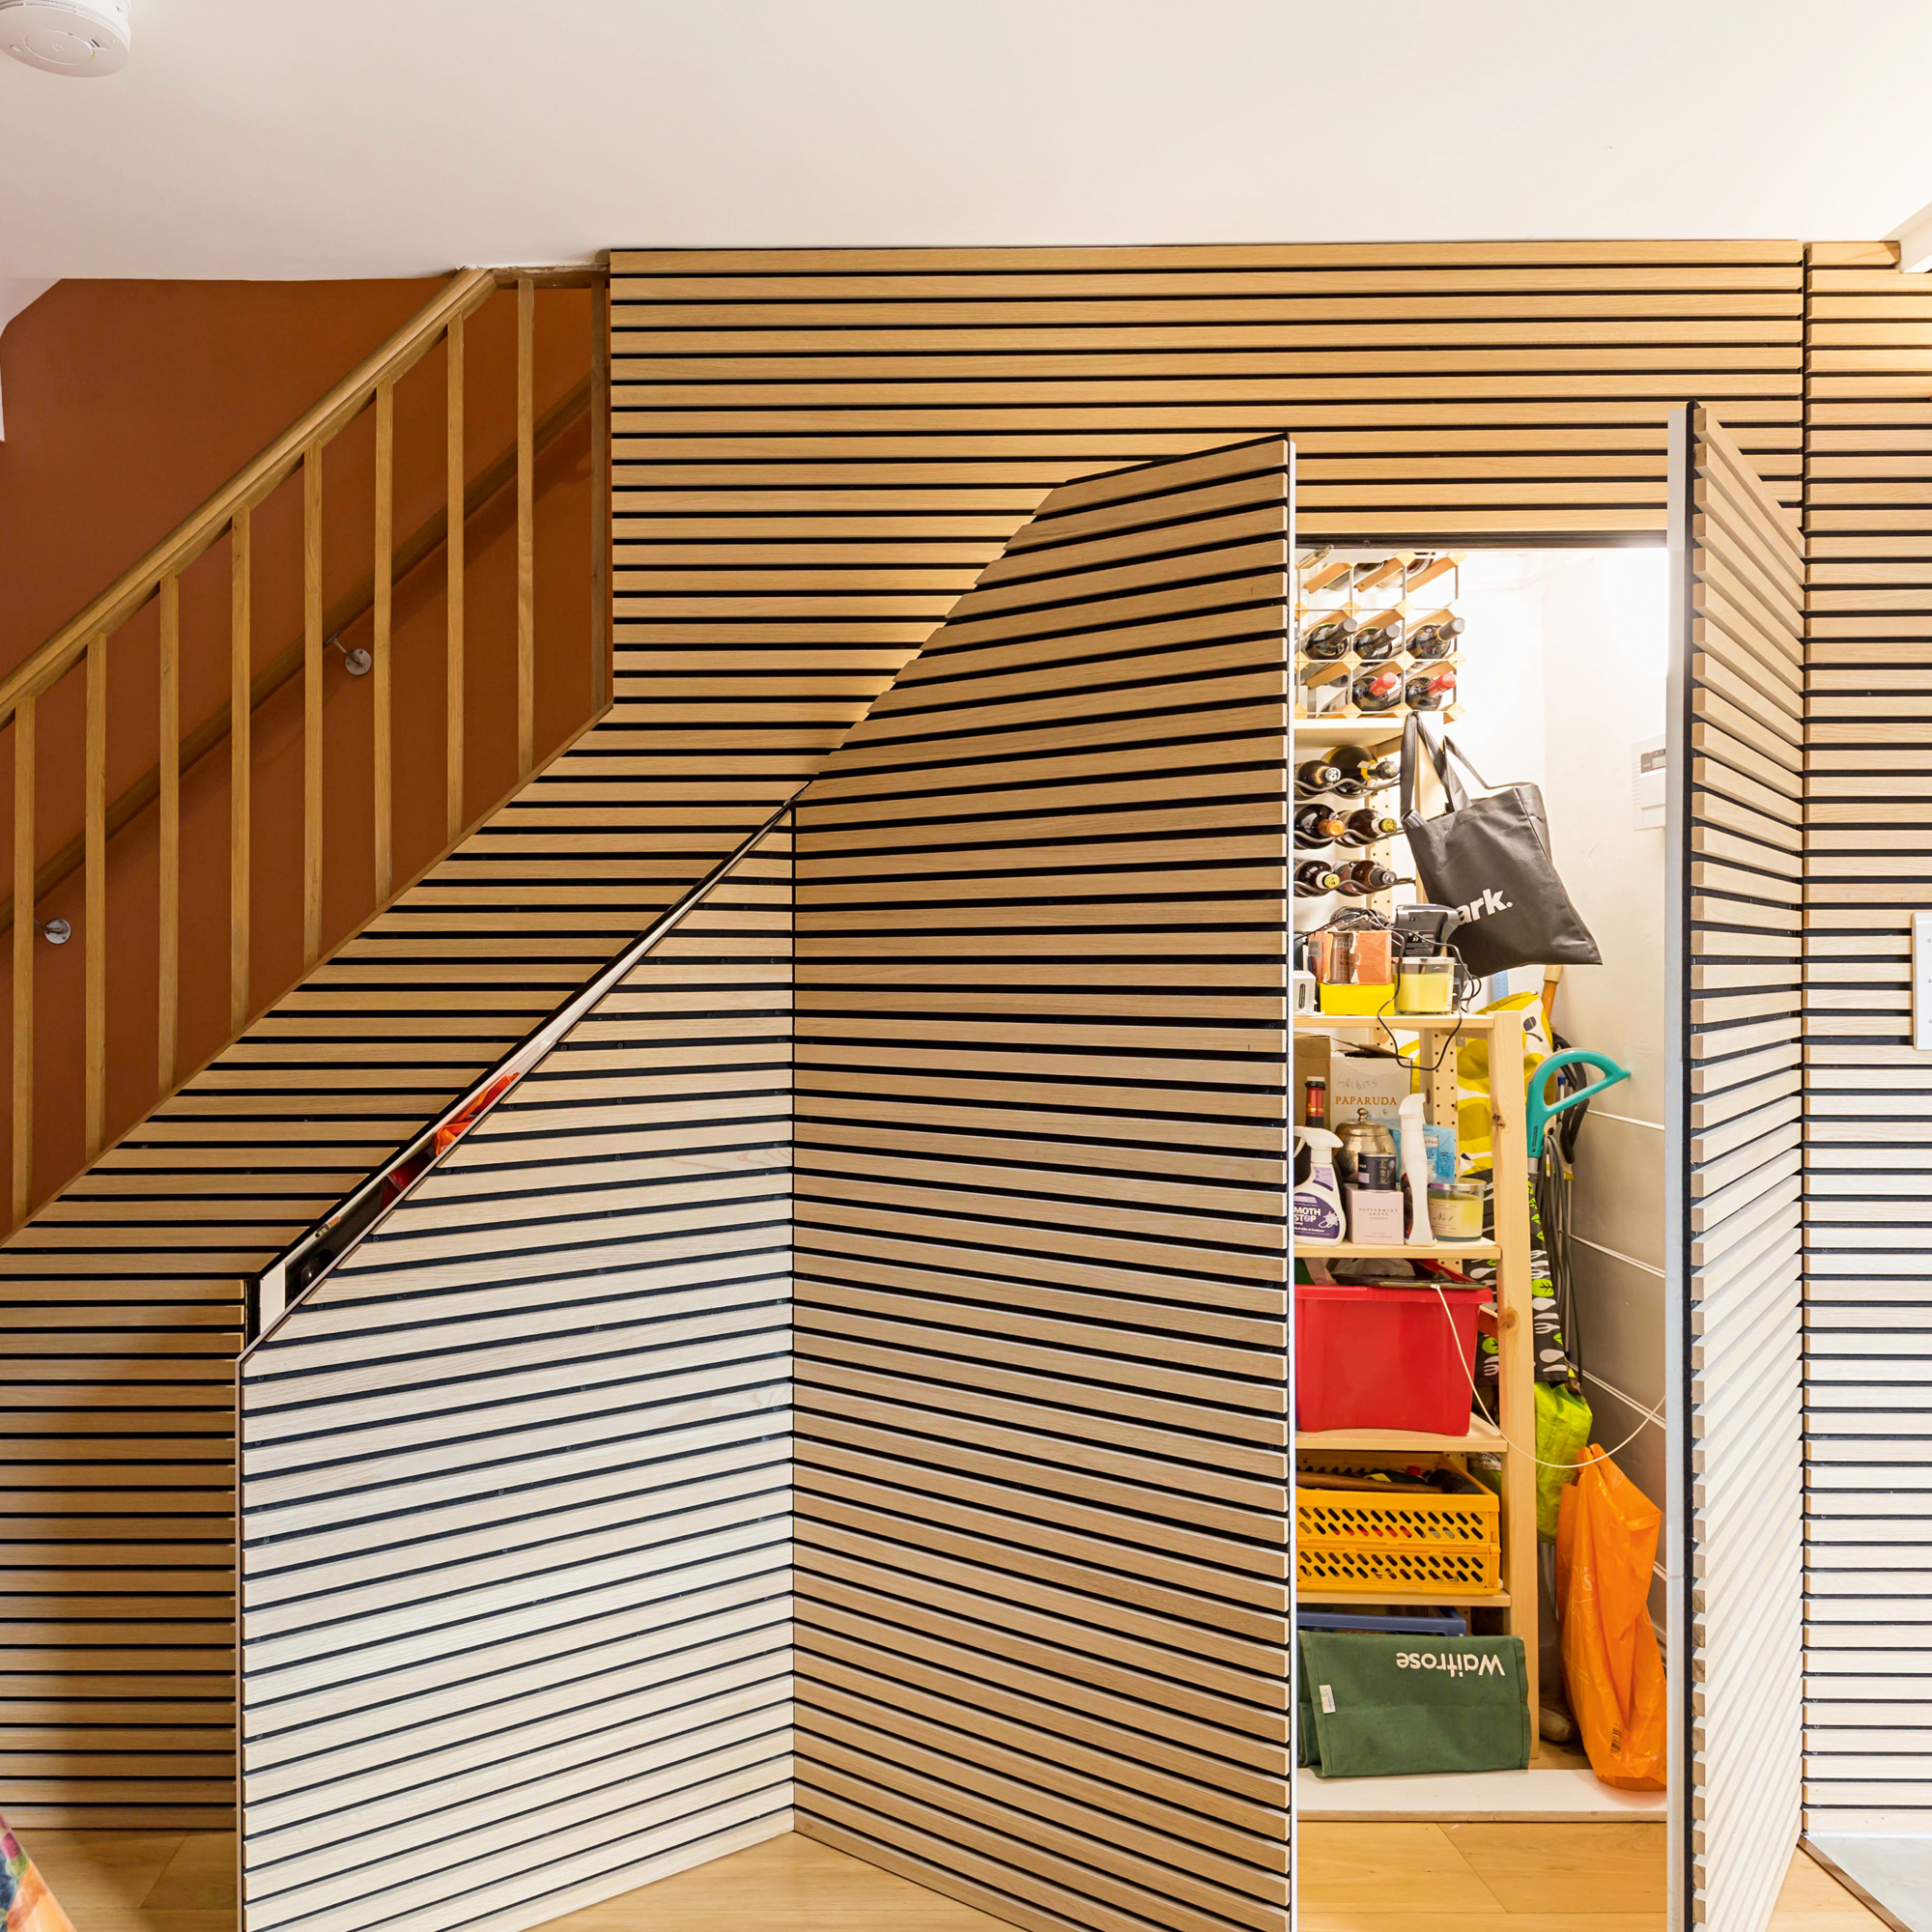 storage cupboards are under the stairs via a hidden doors within the horizontal wood panelling